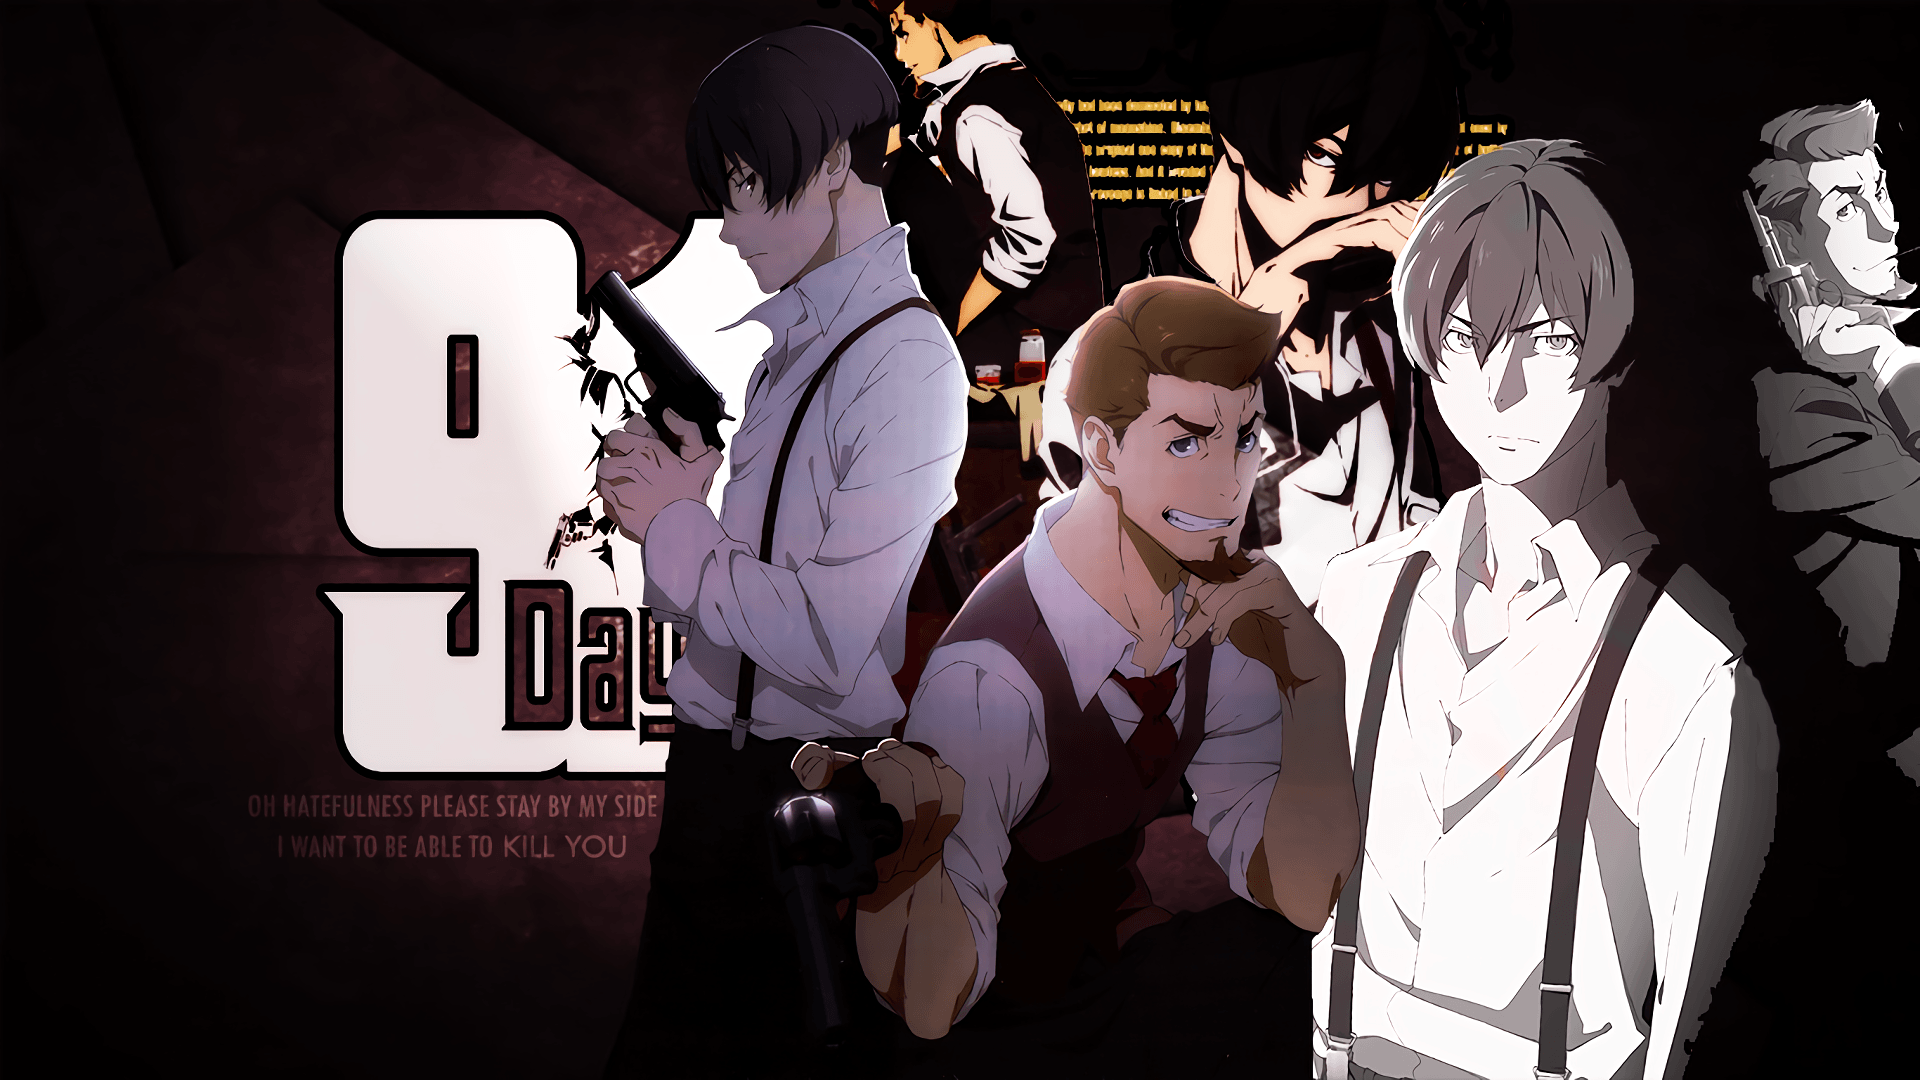 91 Days | Poster